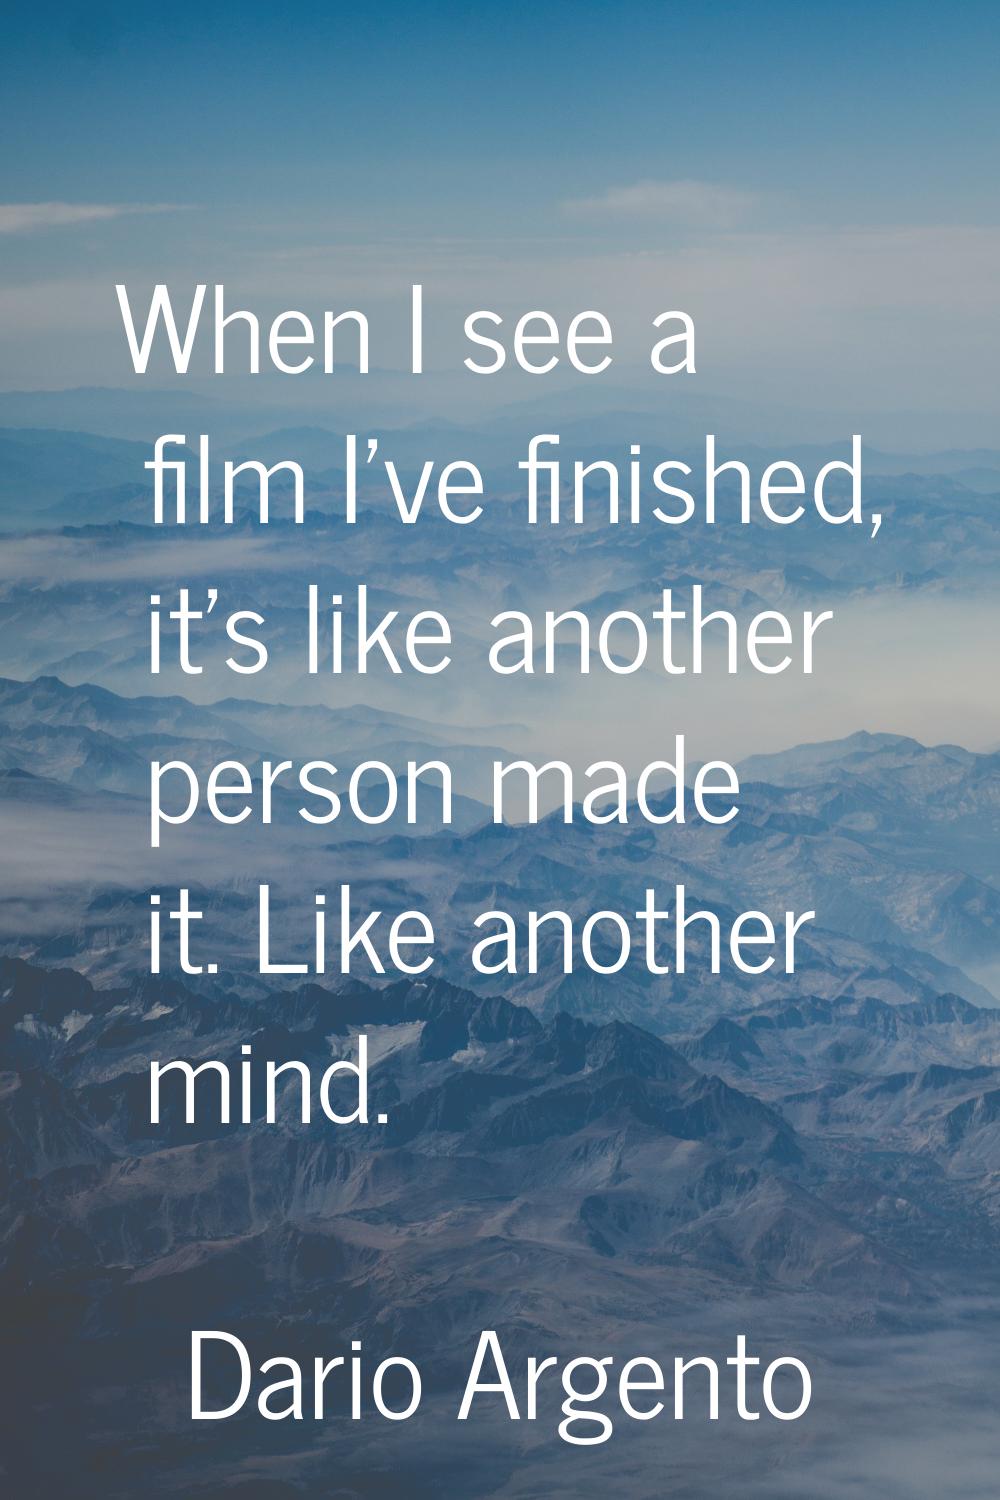 When I see a film I've finished, it's like another person made it. Like another mind.